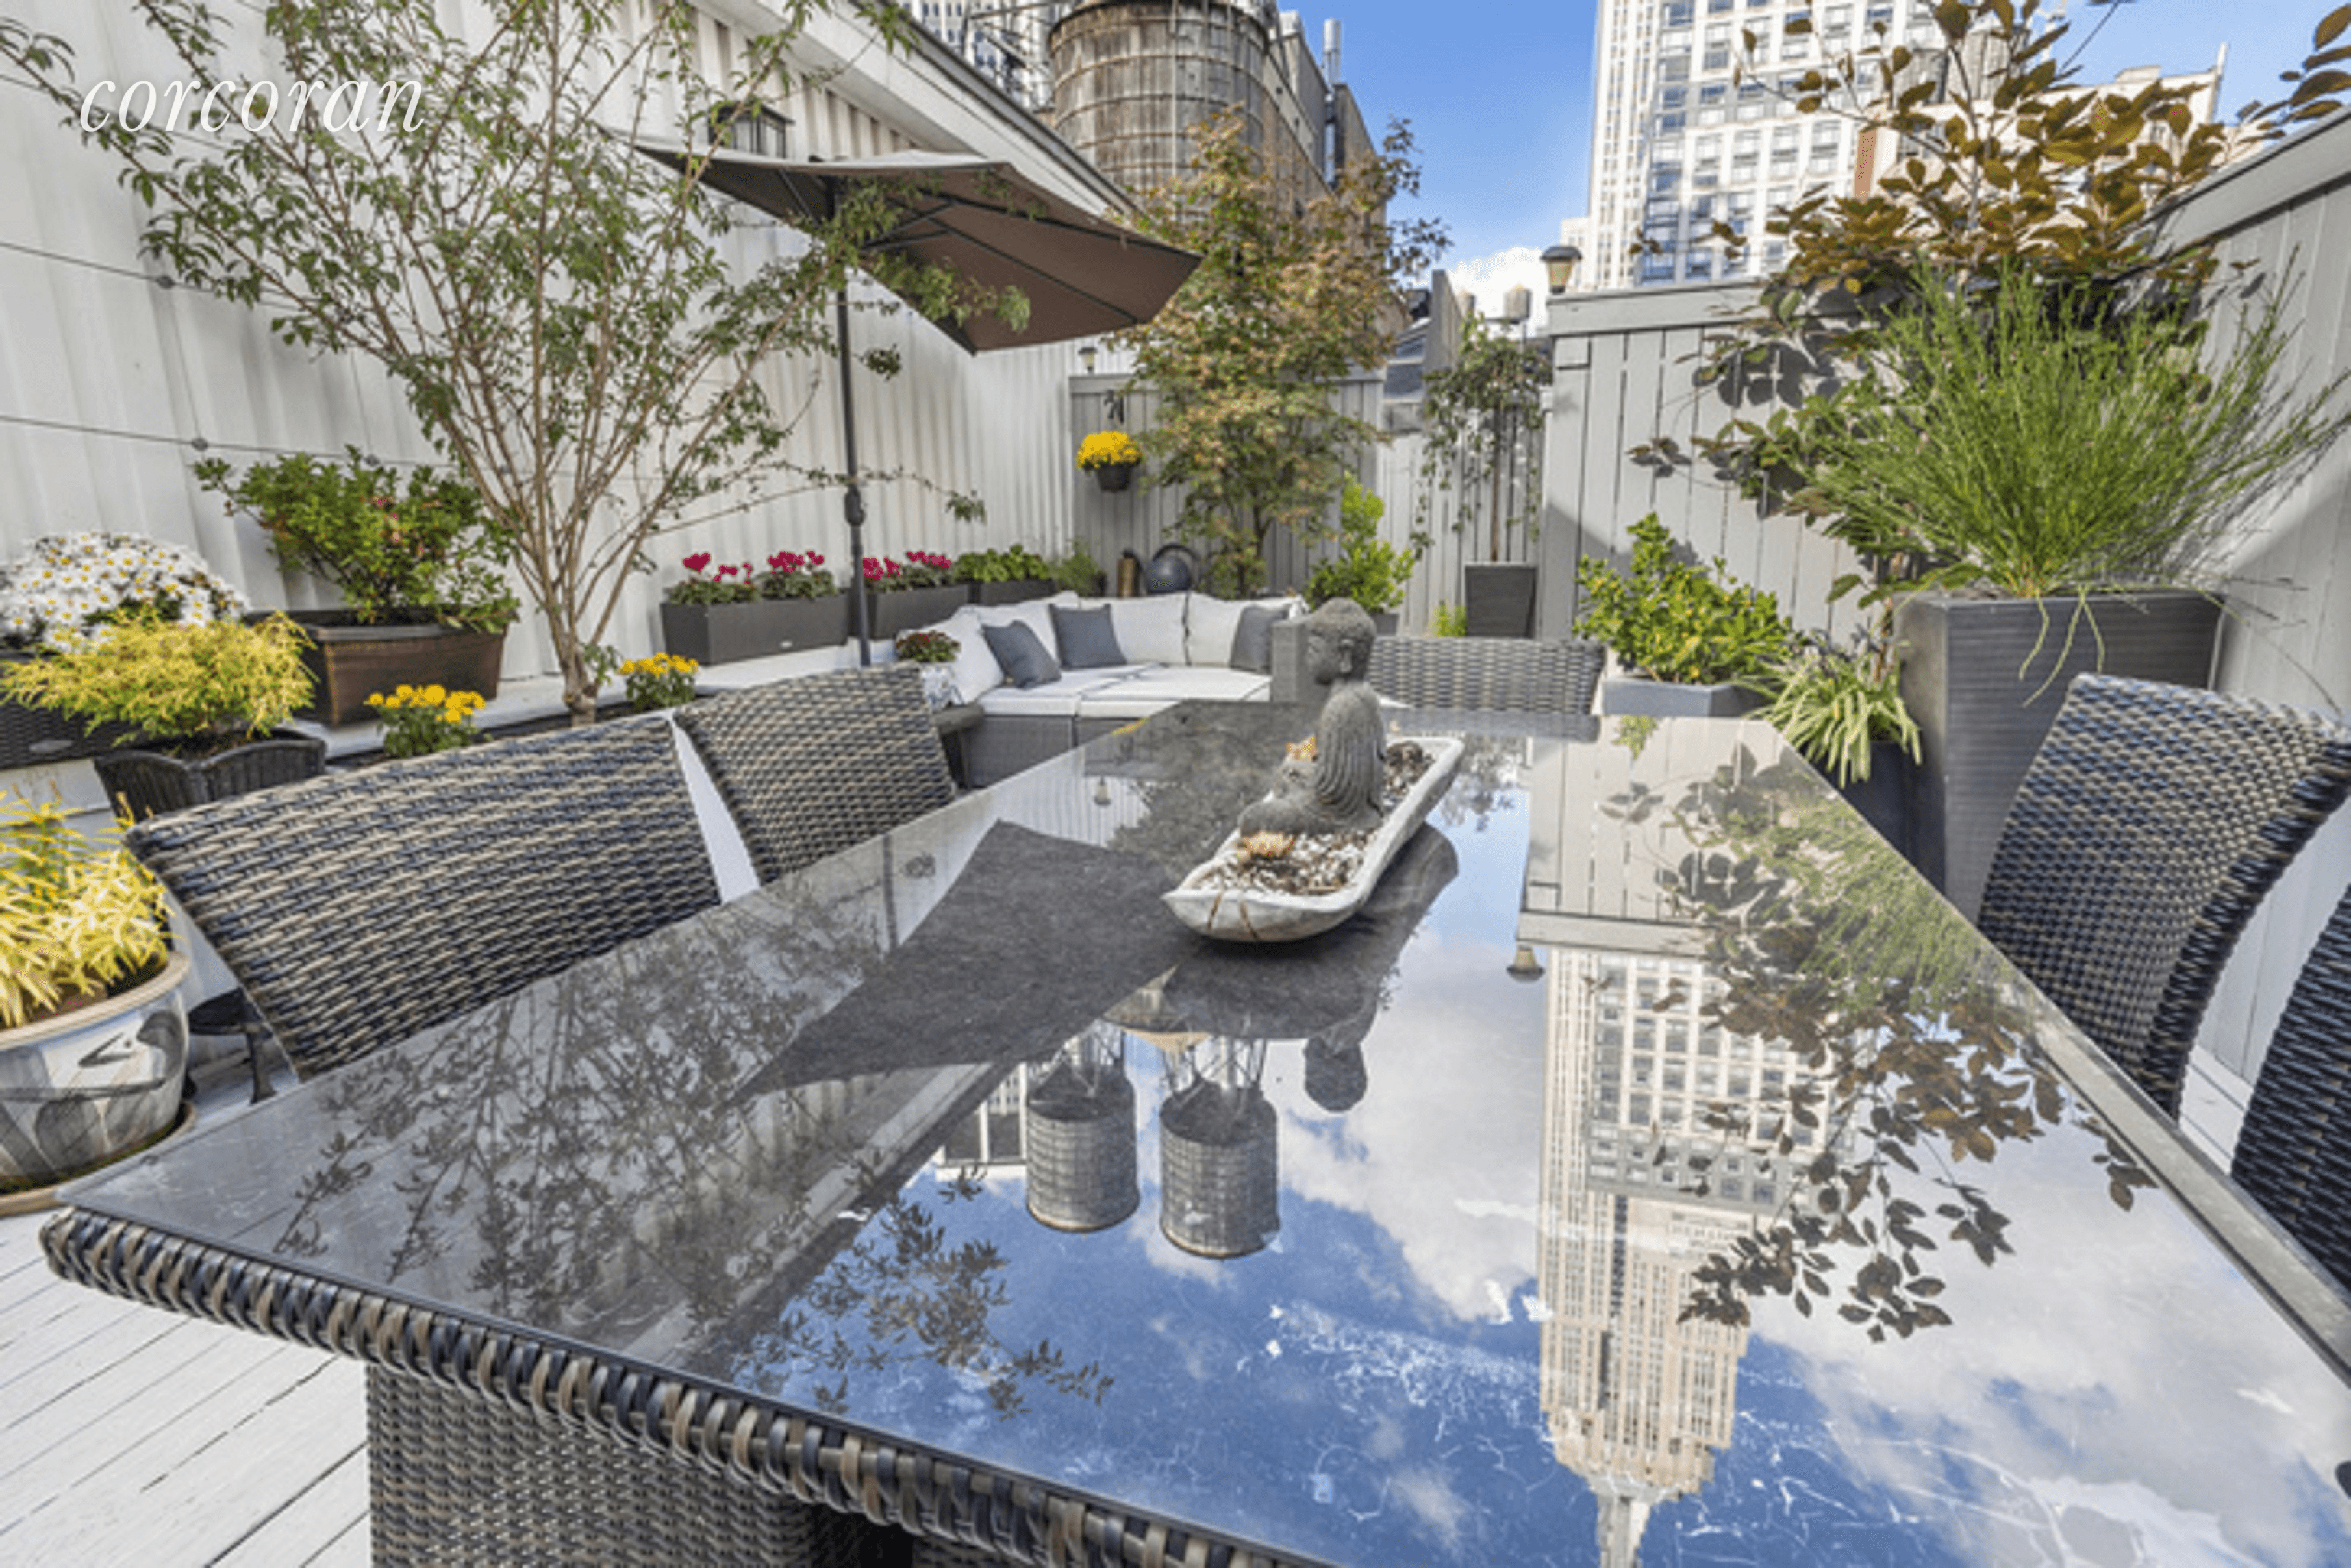 Picture yourself enjoying iconic views of the Empire State building in this 4 bedroom 3 bathroom 3, 850 sq ft.